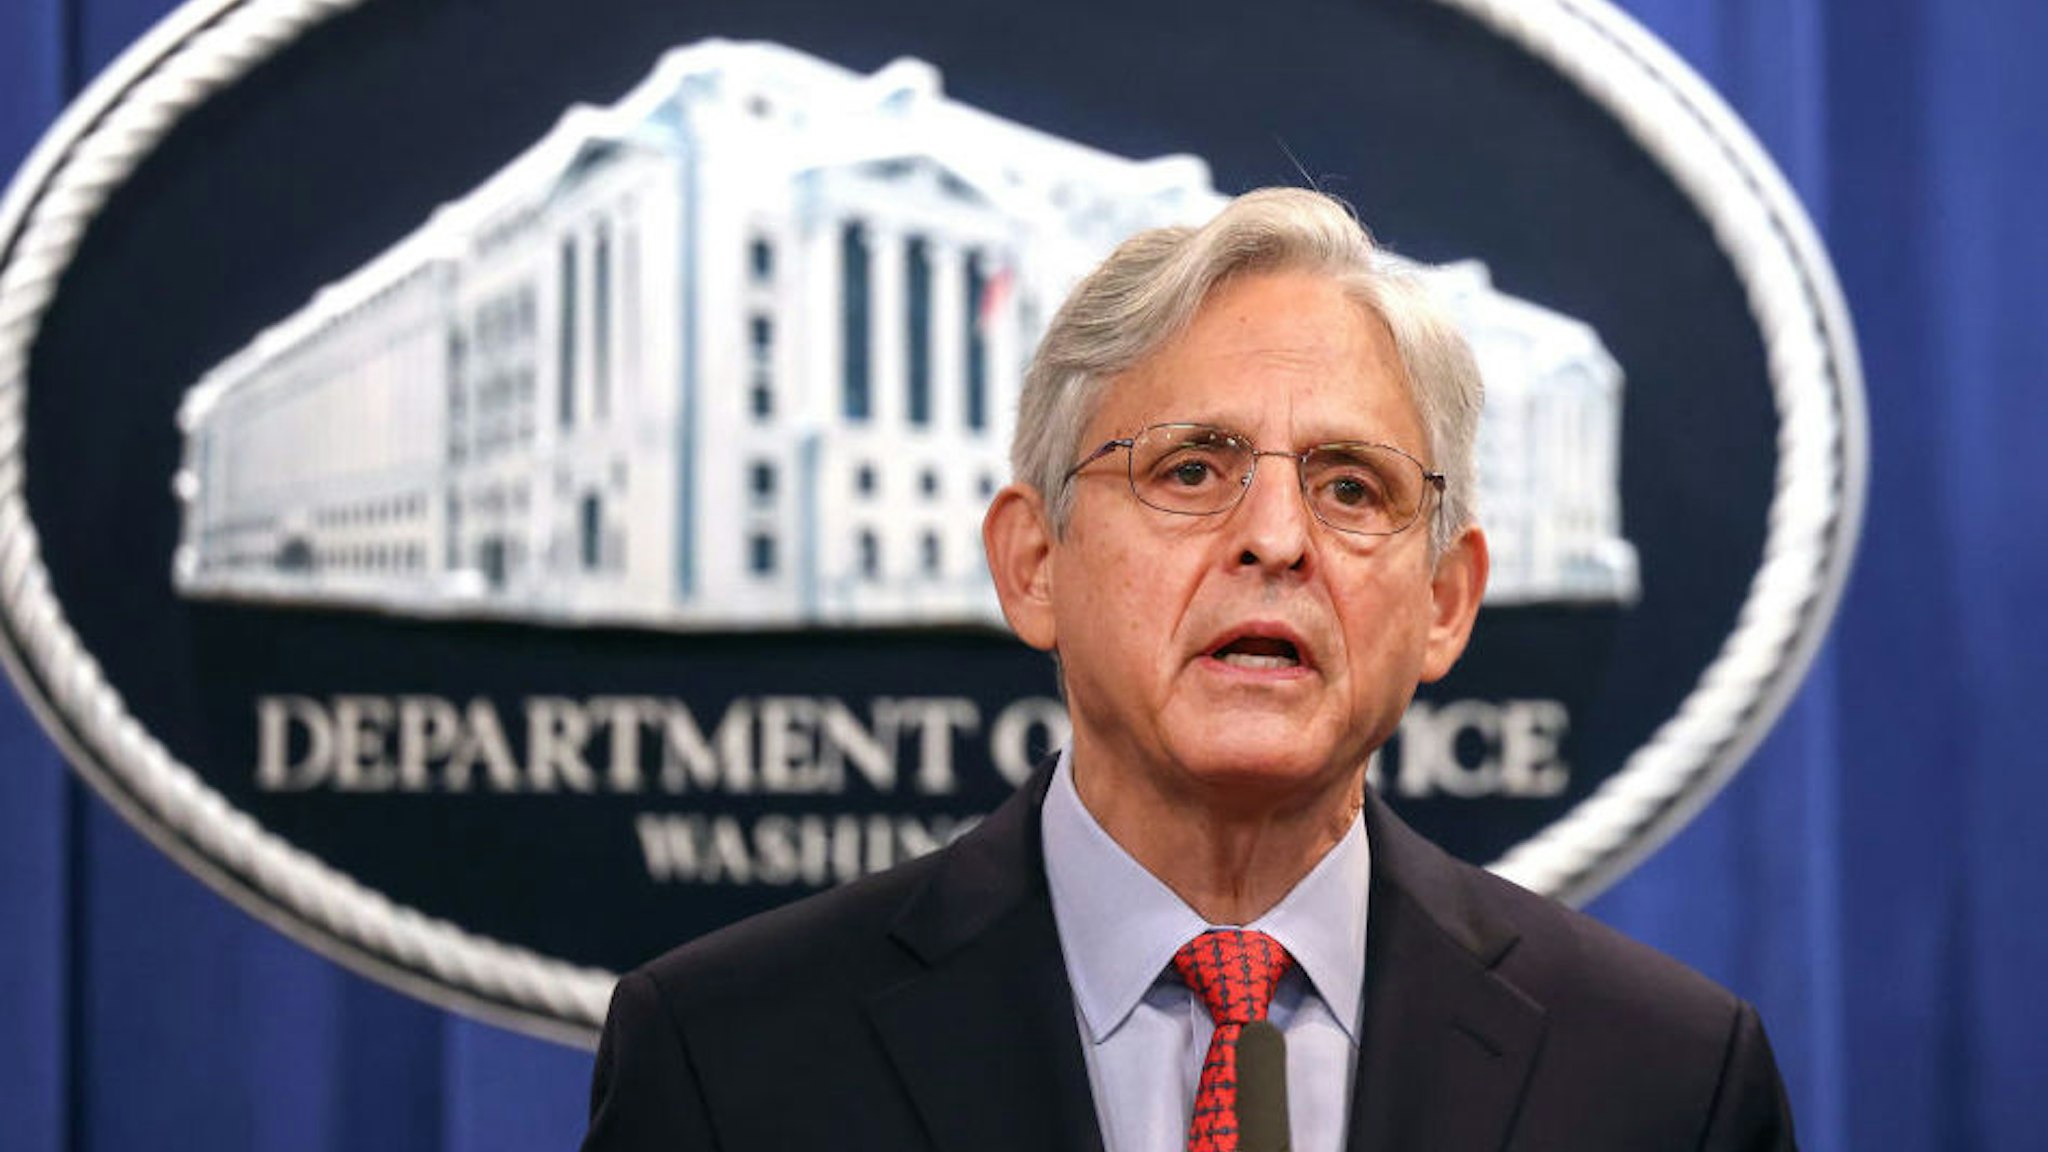 WASHINGTON, DC - AUGUST 05: U.S. Attorney General Merrick Garland announces a federal investigation of the City of Phoenix and the Phoenix Police Department during a news conference at the Department of Justice on August 05, 2021 in Washington, DC. Garland said the Justice Department has opened a pattern or practice investigation into the City of Phoenix and the Phoenix Police Department to determine if they have violated federal laws or citizens constitutional rights.